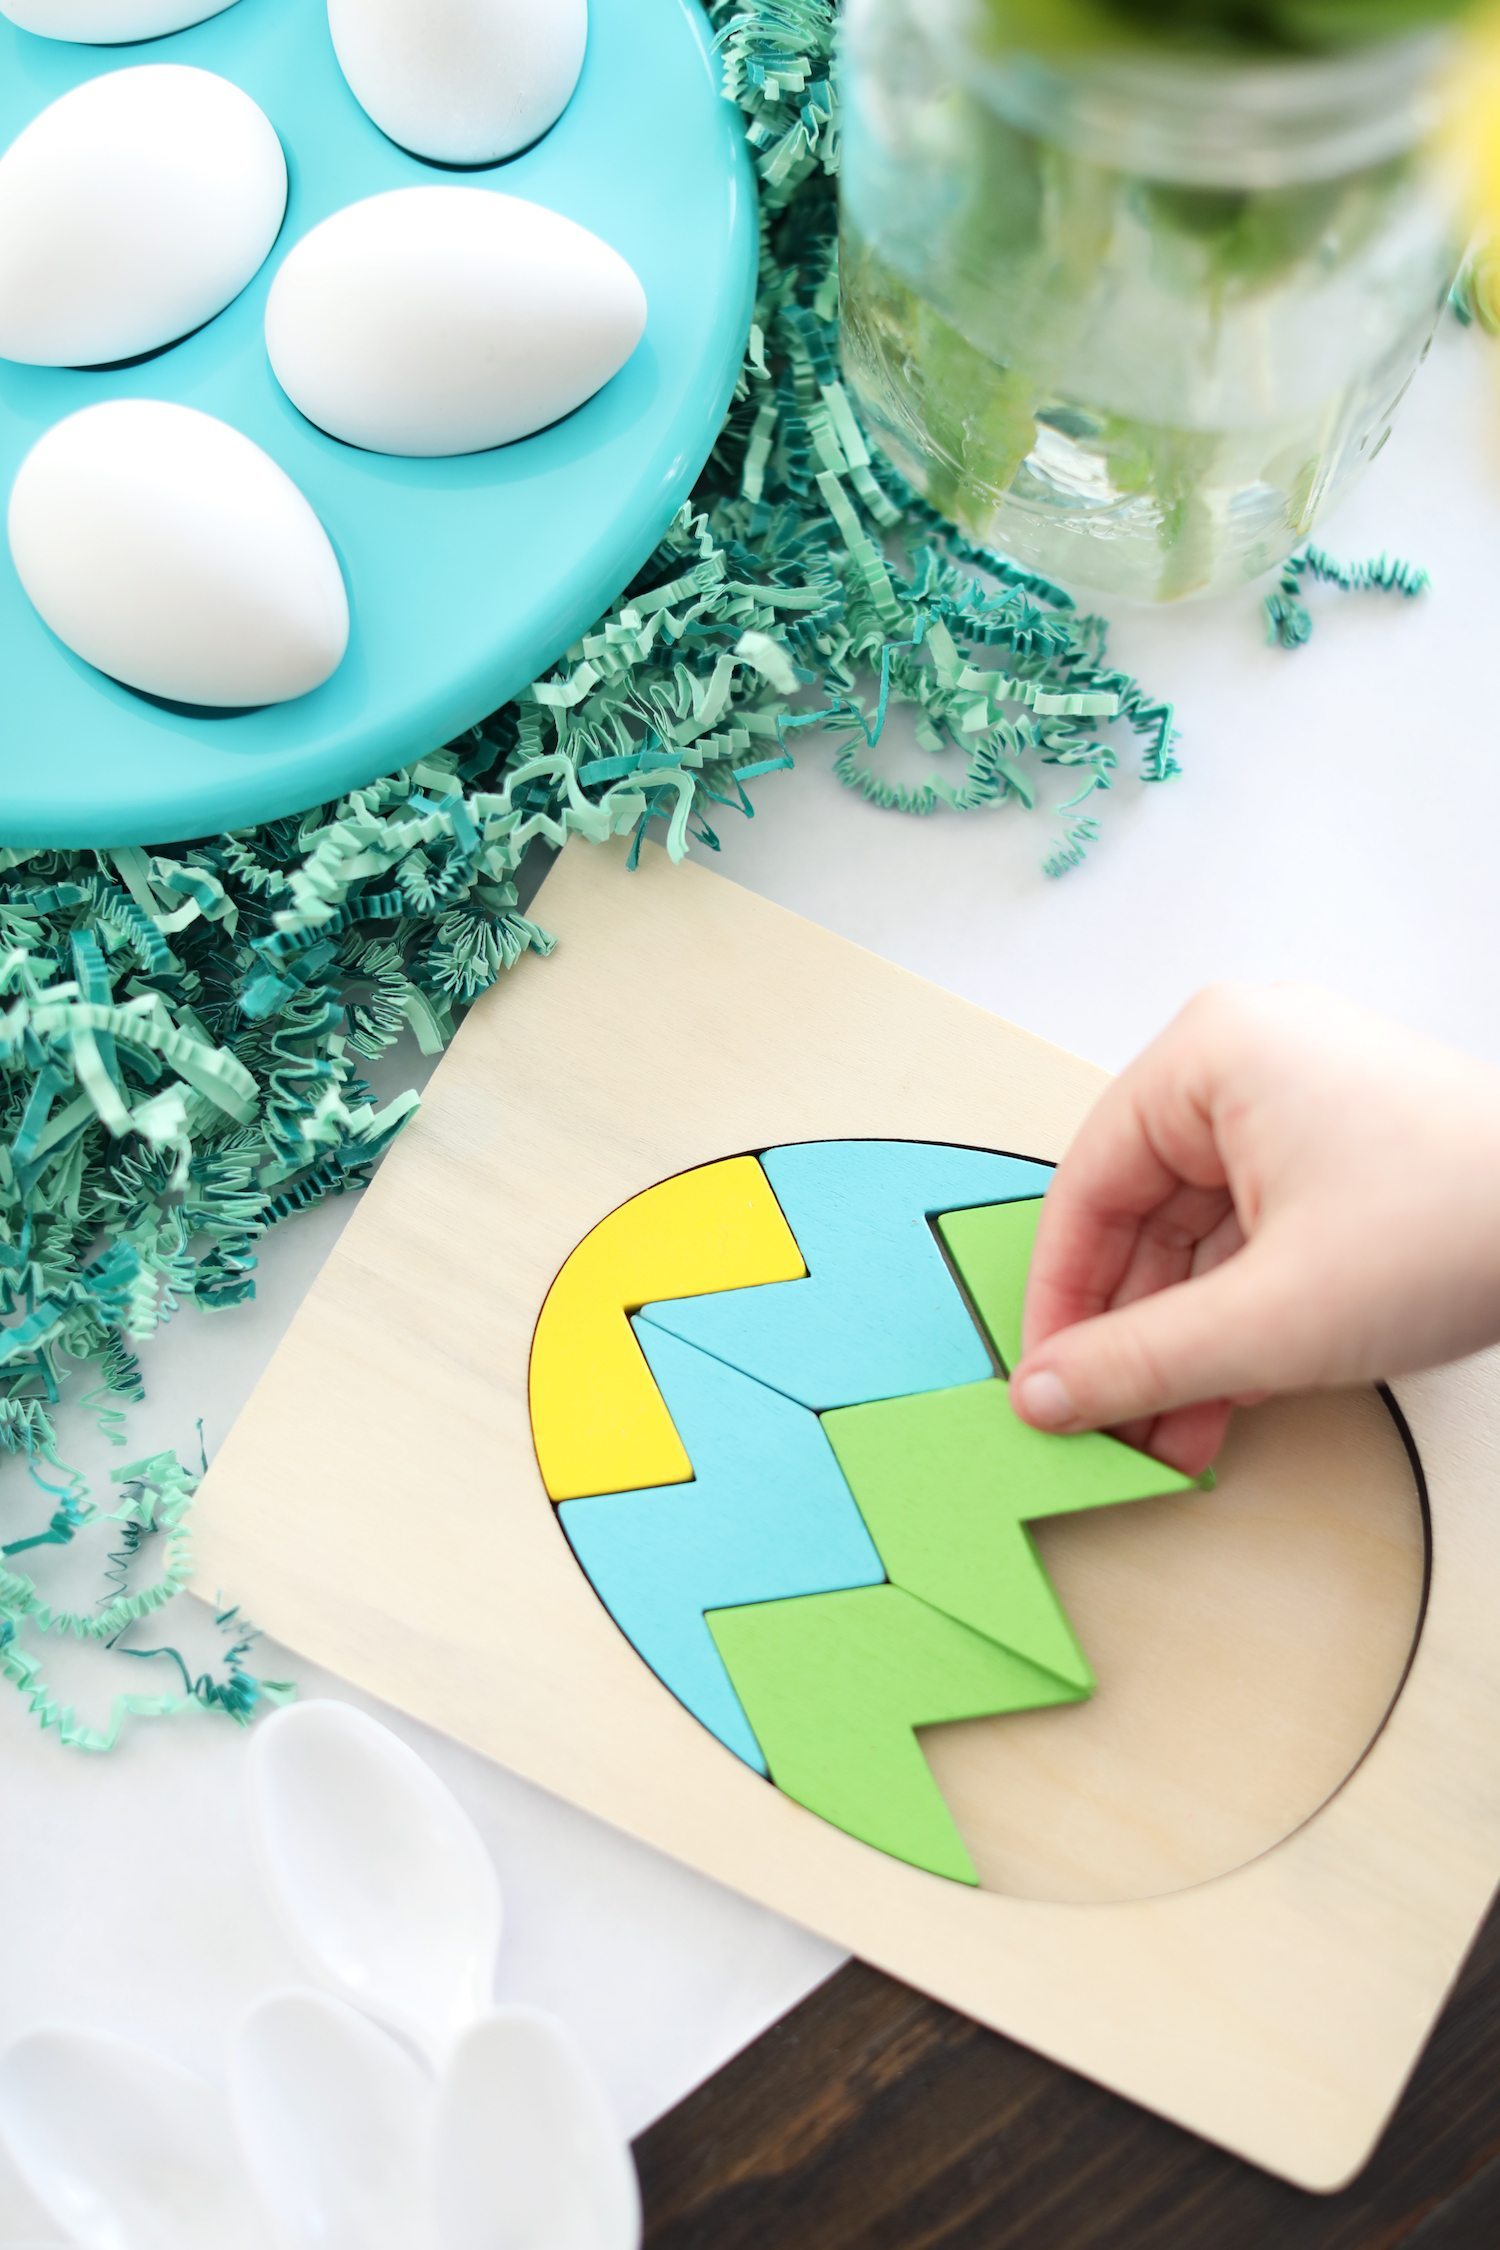 Tips for throwing a colorful kid-friendly Easter egg decorating party! Visit @cydconverse for party ideas, entertaining tips, party recipes and more!